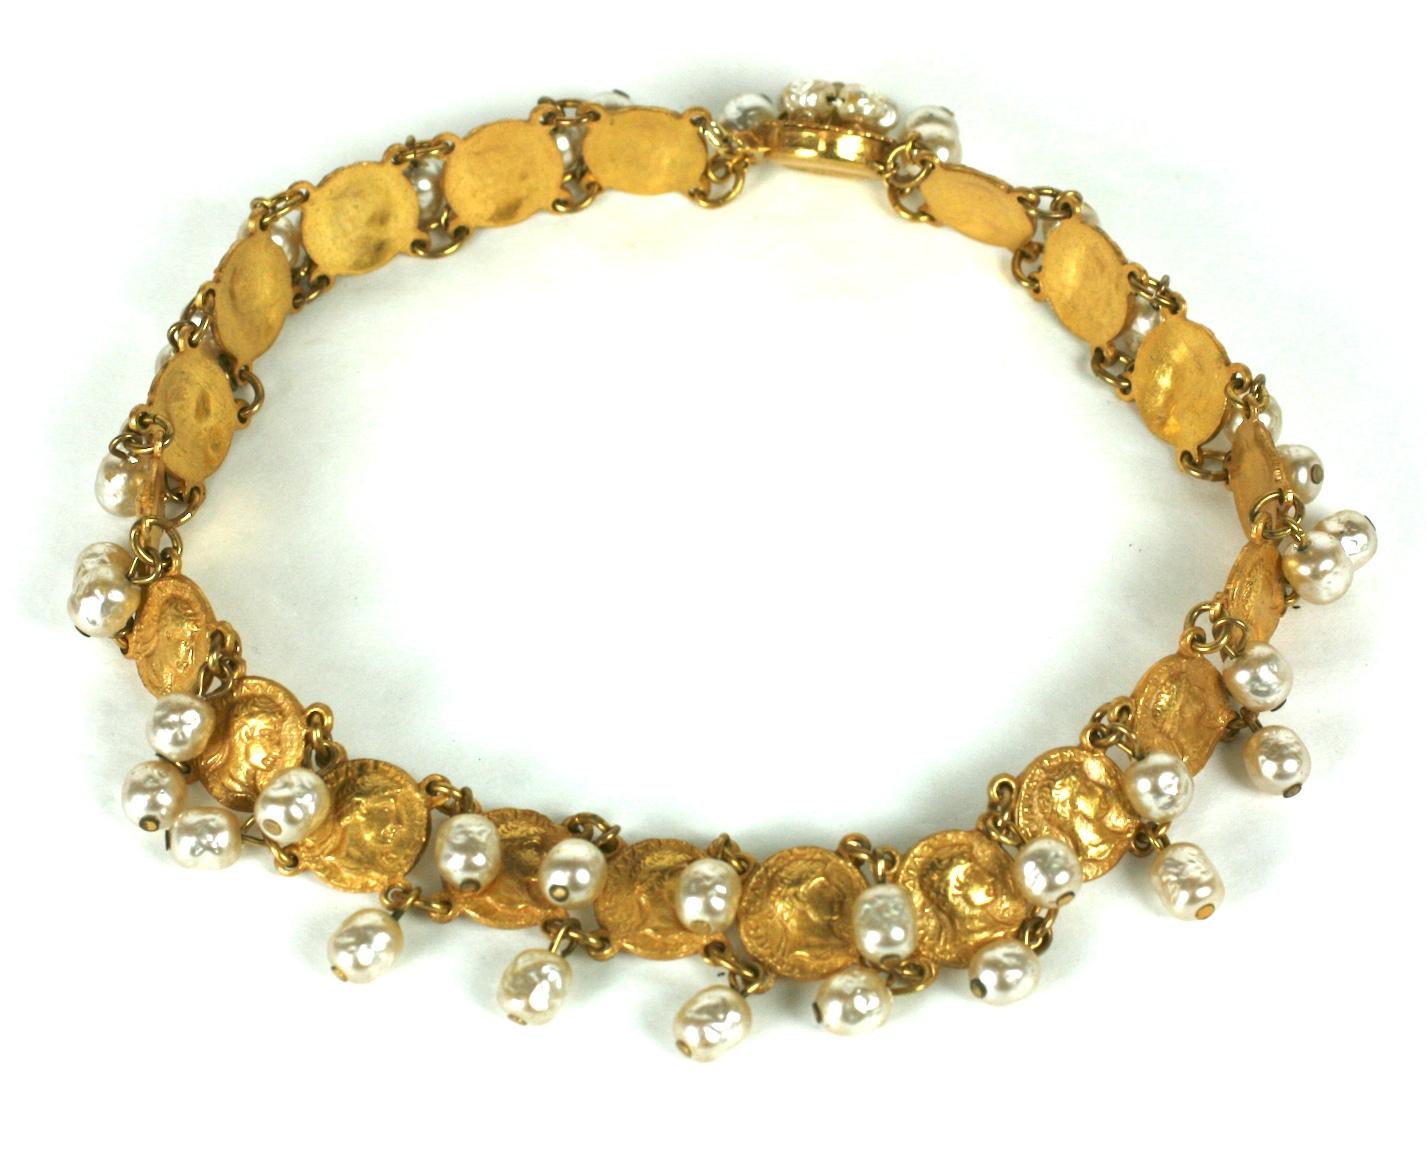 Attractive Miriam Haskell Pearl Pendant Choker in signature Russian gilt finish. Each link depicts a gilded antique coin with faux pearl drops dangling from top and bottom edges.  13